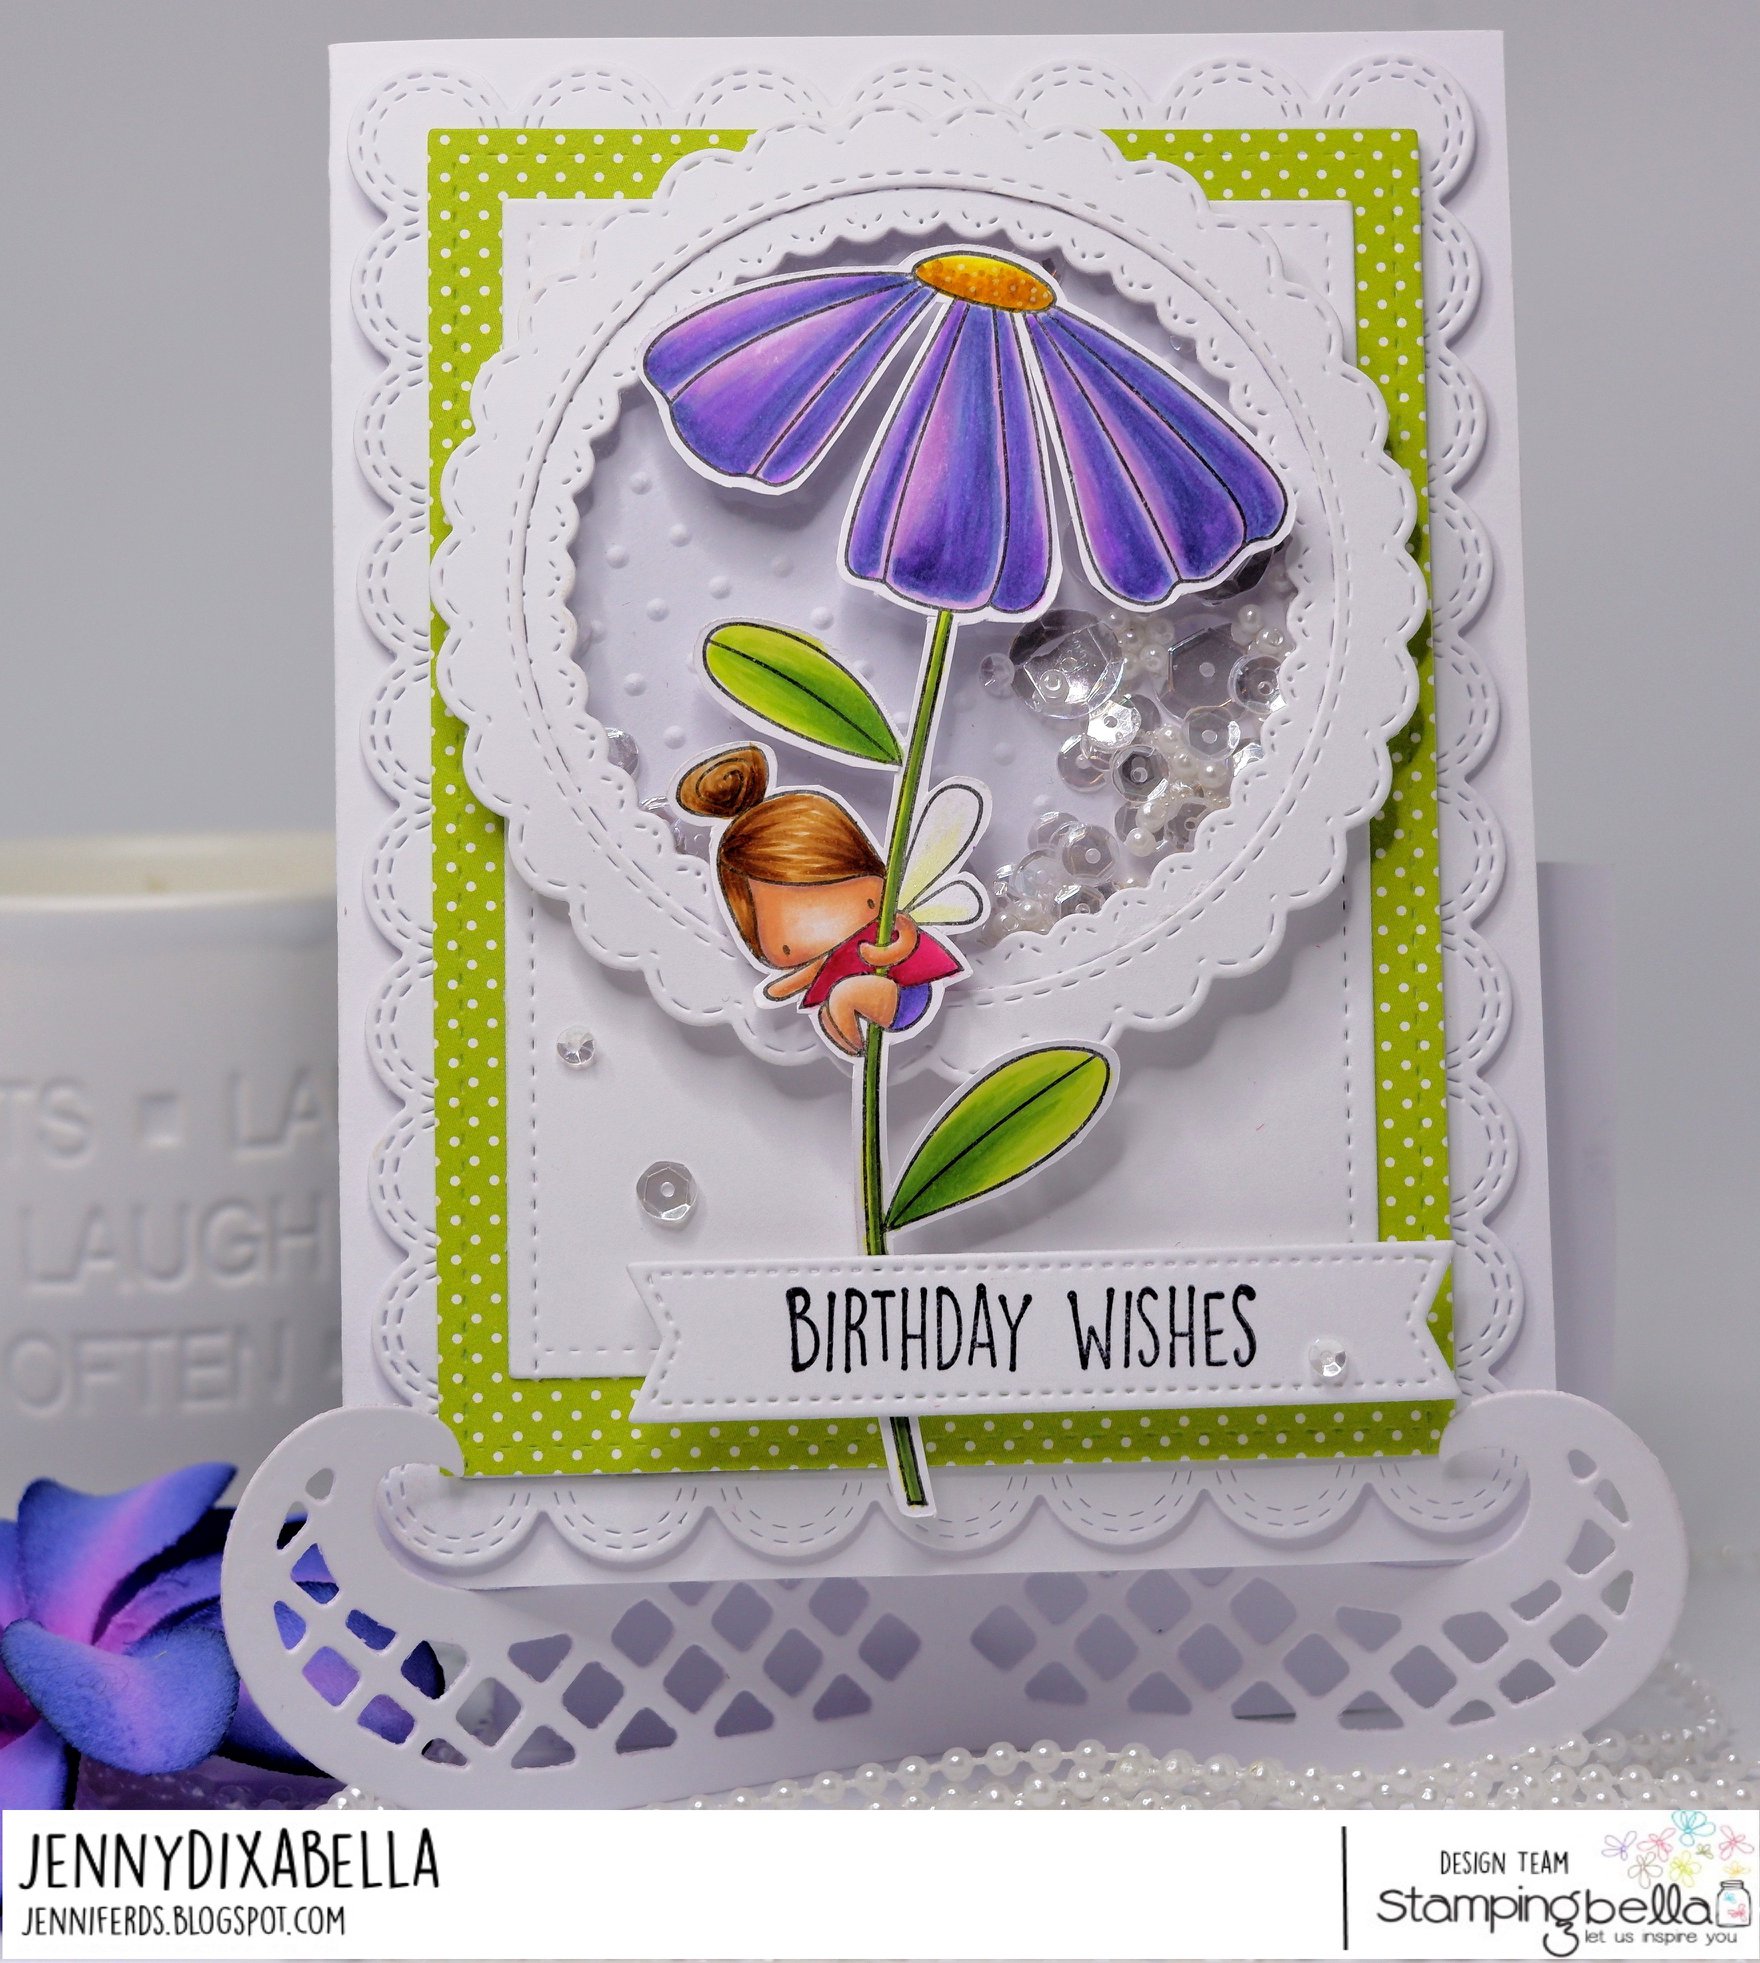 www.stampingbella.com: rubber stamp used DAISY FLORAL SET.  Card by Jenny Dix